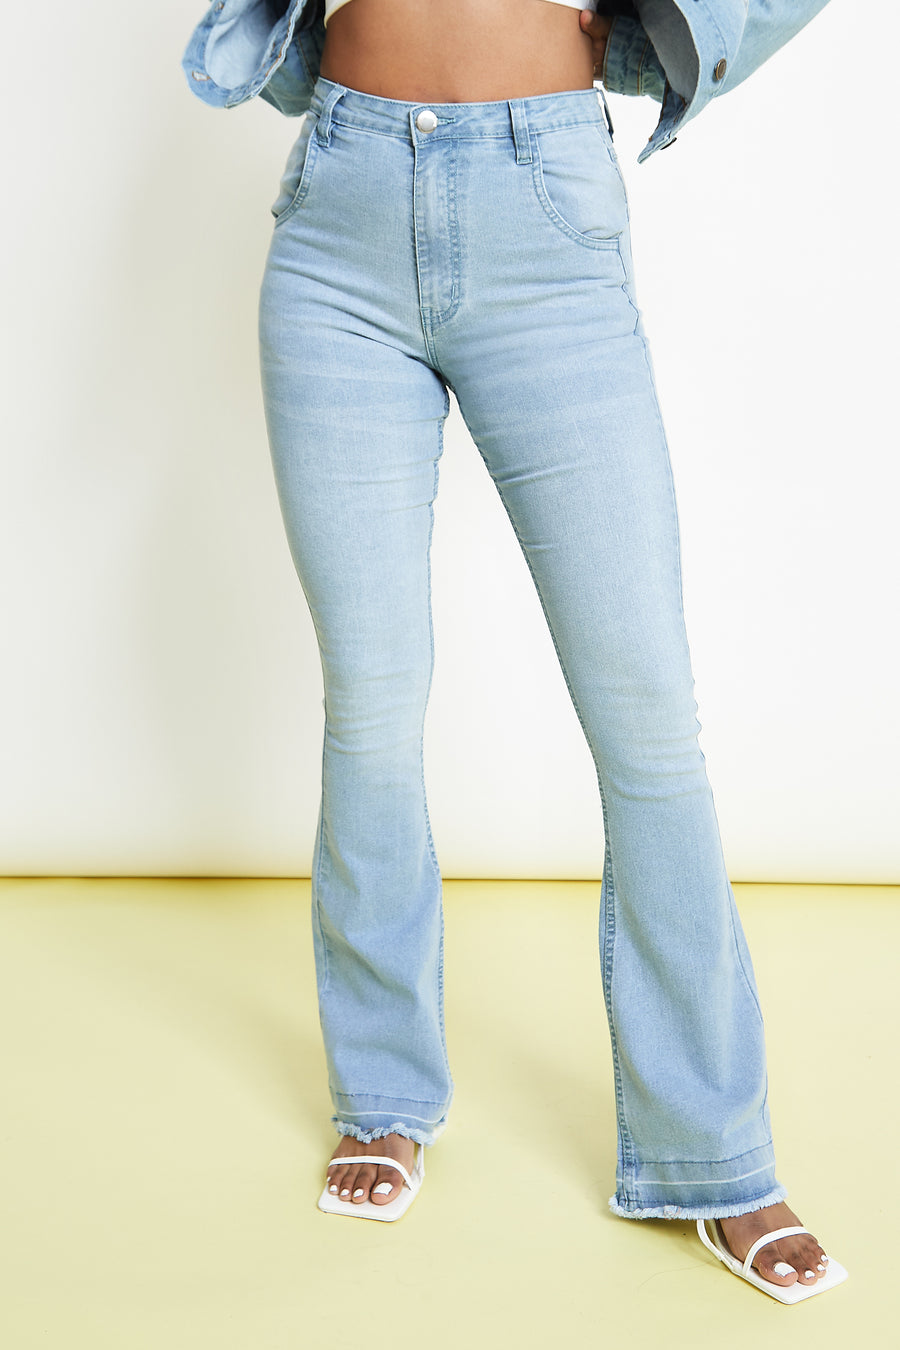 Women's High Waisted Jeans 